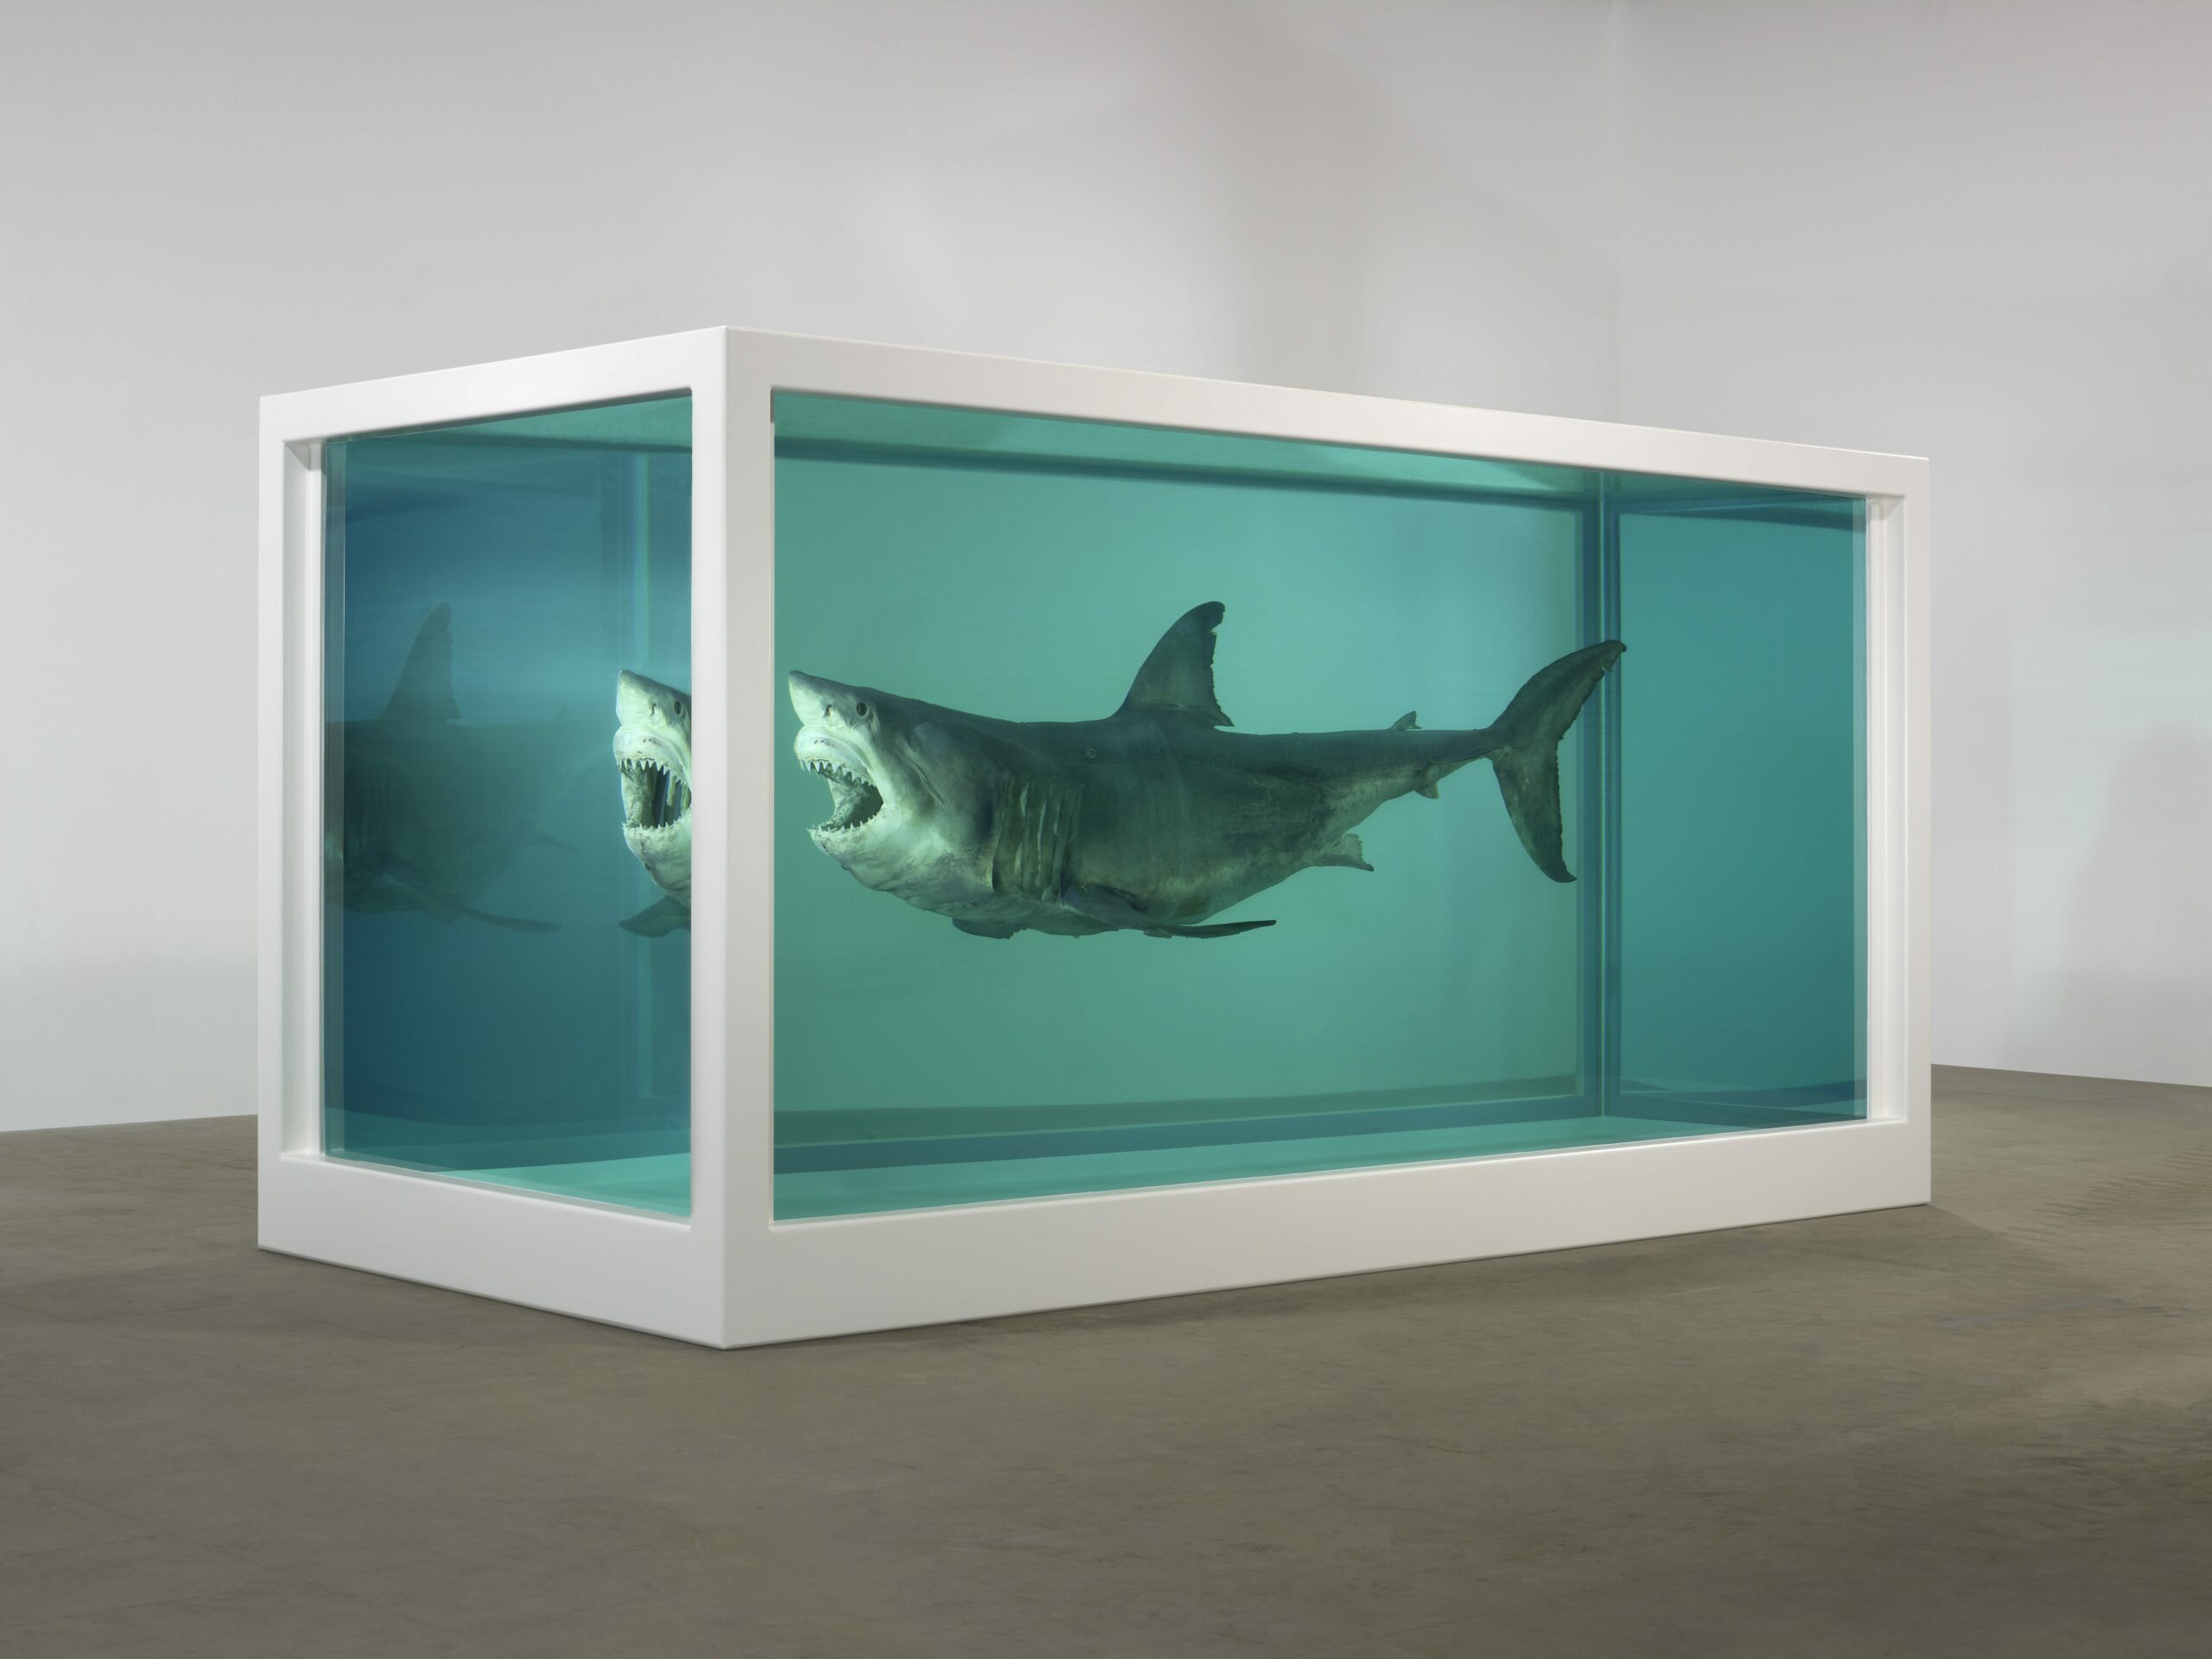 Damien Hirst, The Immortal, 1997-2005 © Damien Hirst and Science Ltd. All rights reserved, DACS 2013, Photo Prudence Cuming Associates